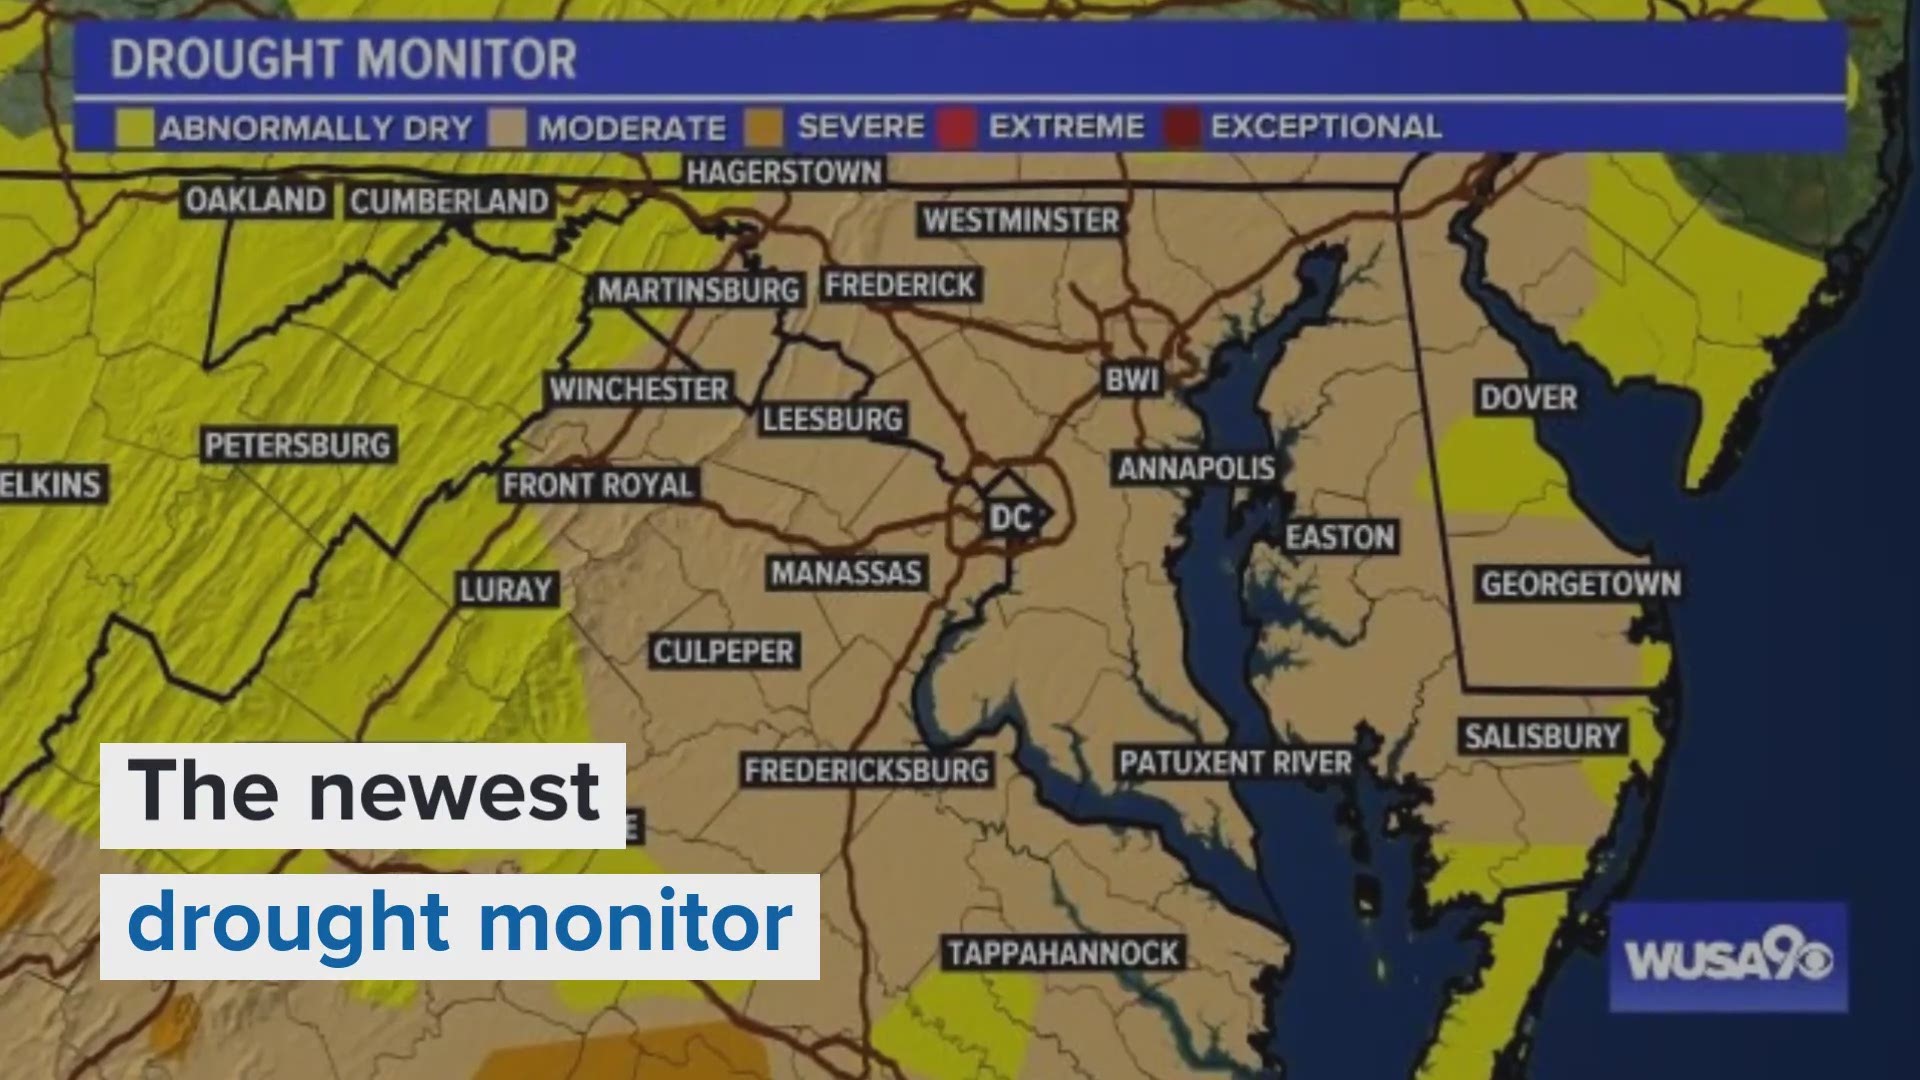 The entire DC metro is now in a moderate drought